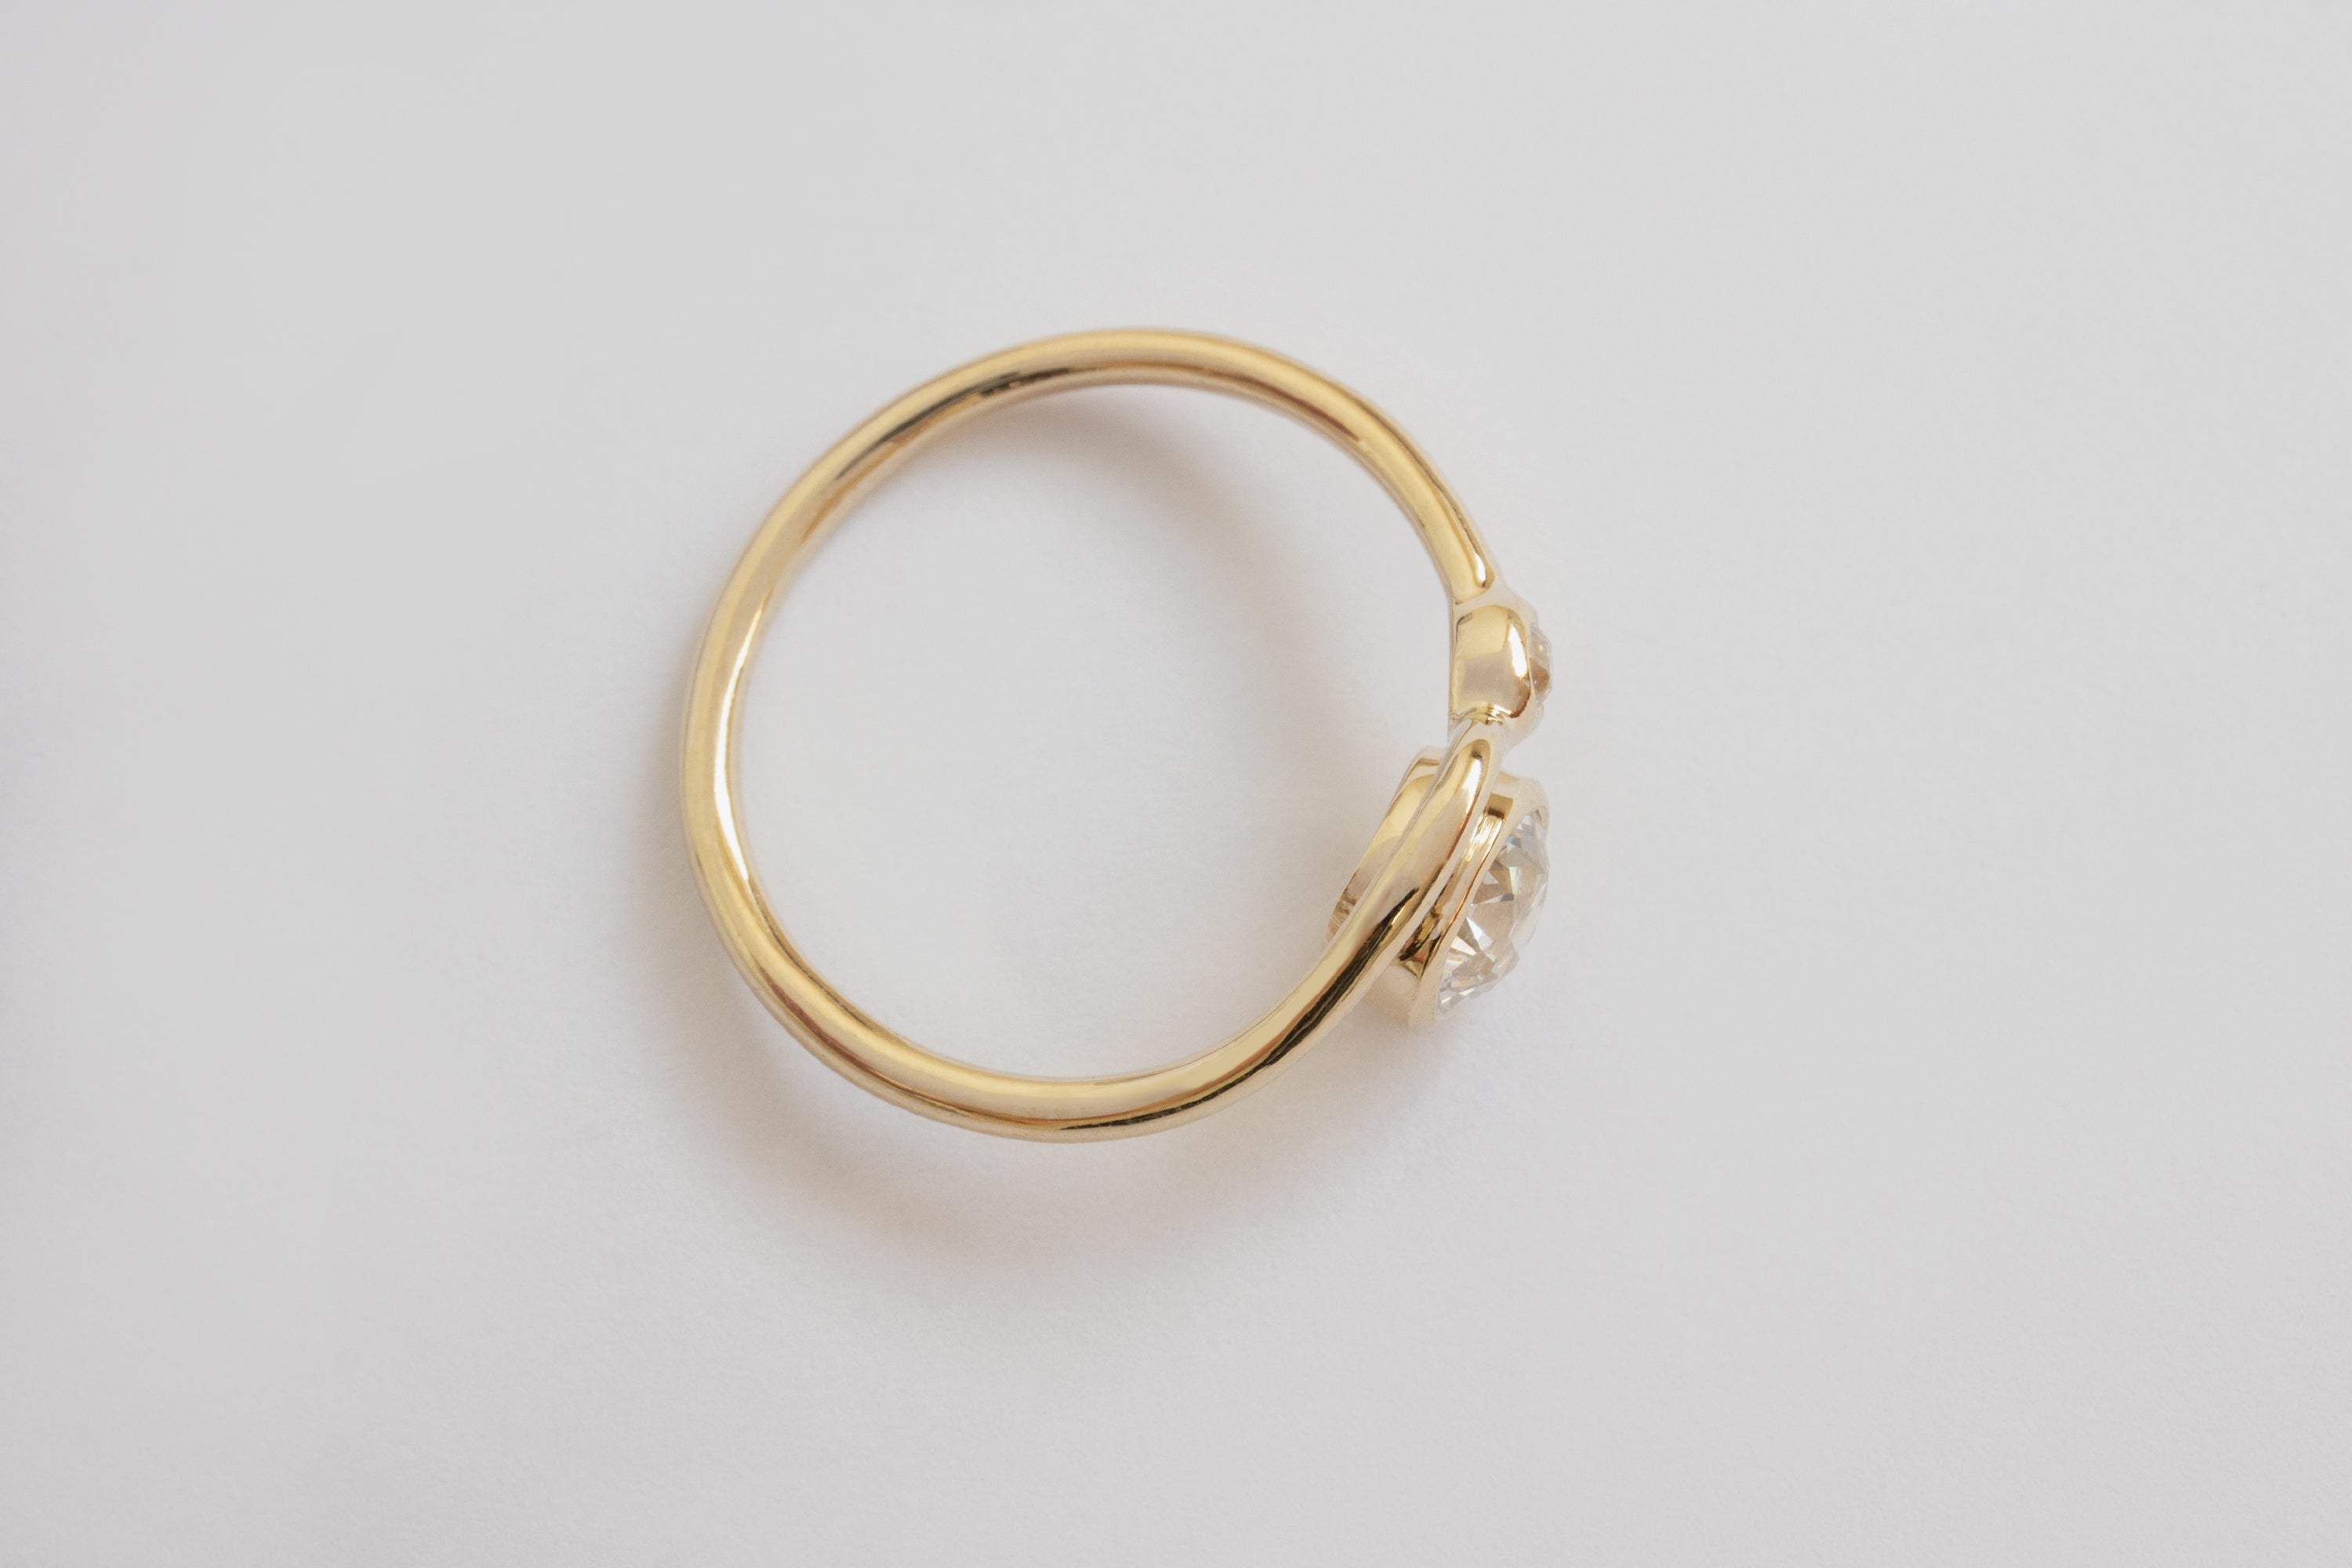 Top view of a bright white large round diamond and smaller diamond each framed in circular yellow gold setting on a wavy yellow gold band layered with another simple wavy yellow gold ring band